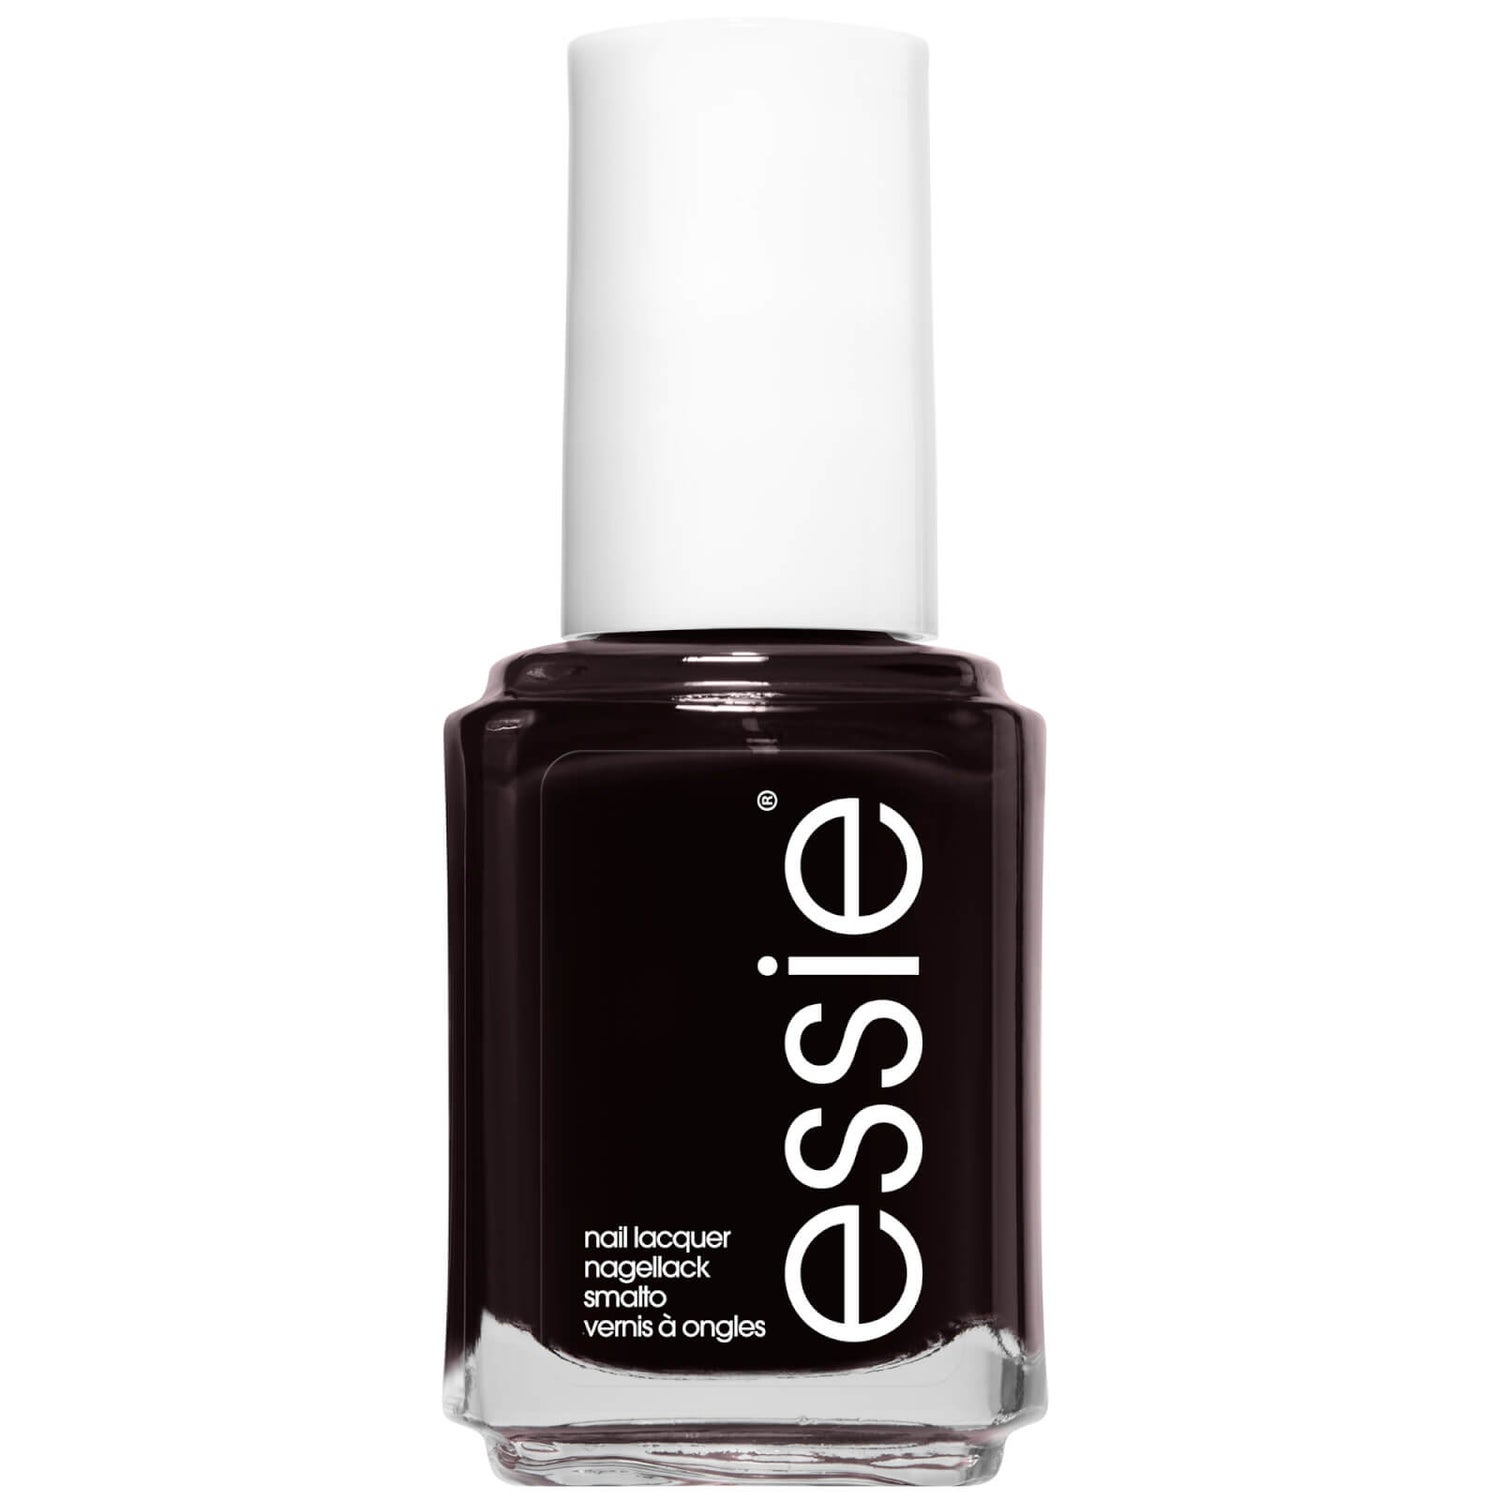 Vernis à ongles professionnel Wicked d'essie  (13,5ml)